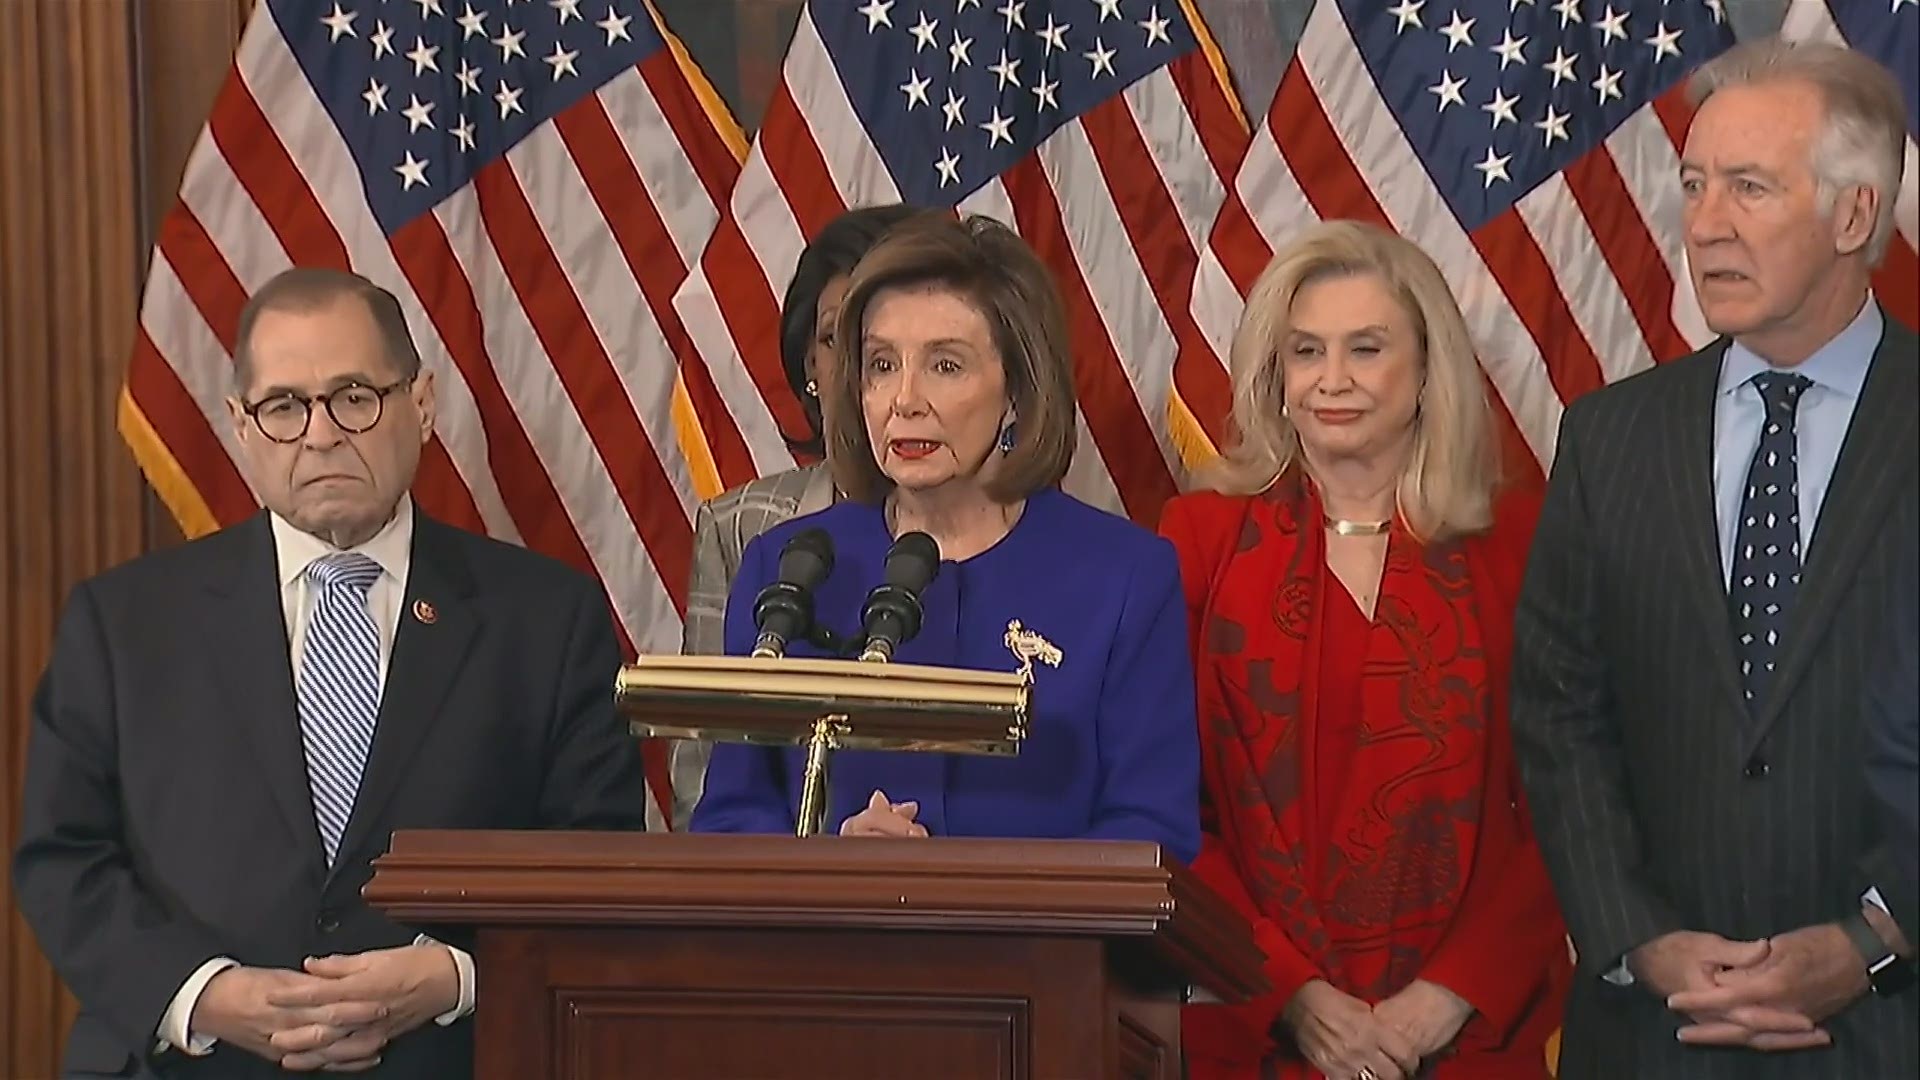 House Democrats announced two articles of impeachment Tuesday against President Donald Trump - abuse of power and obstruction of Congress.